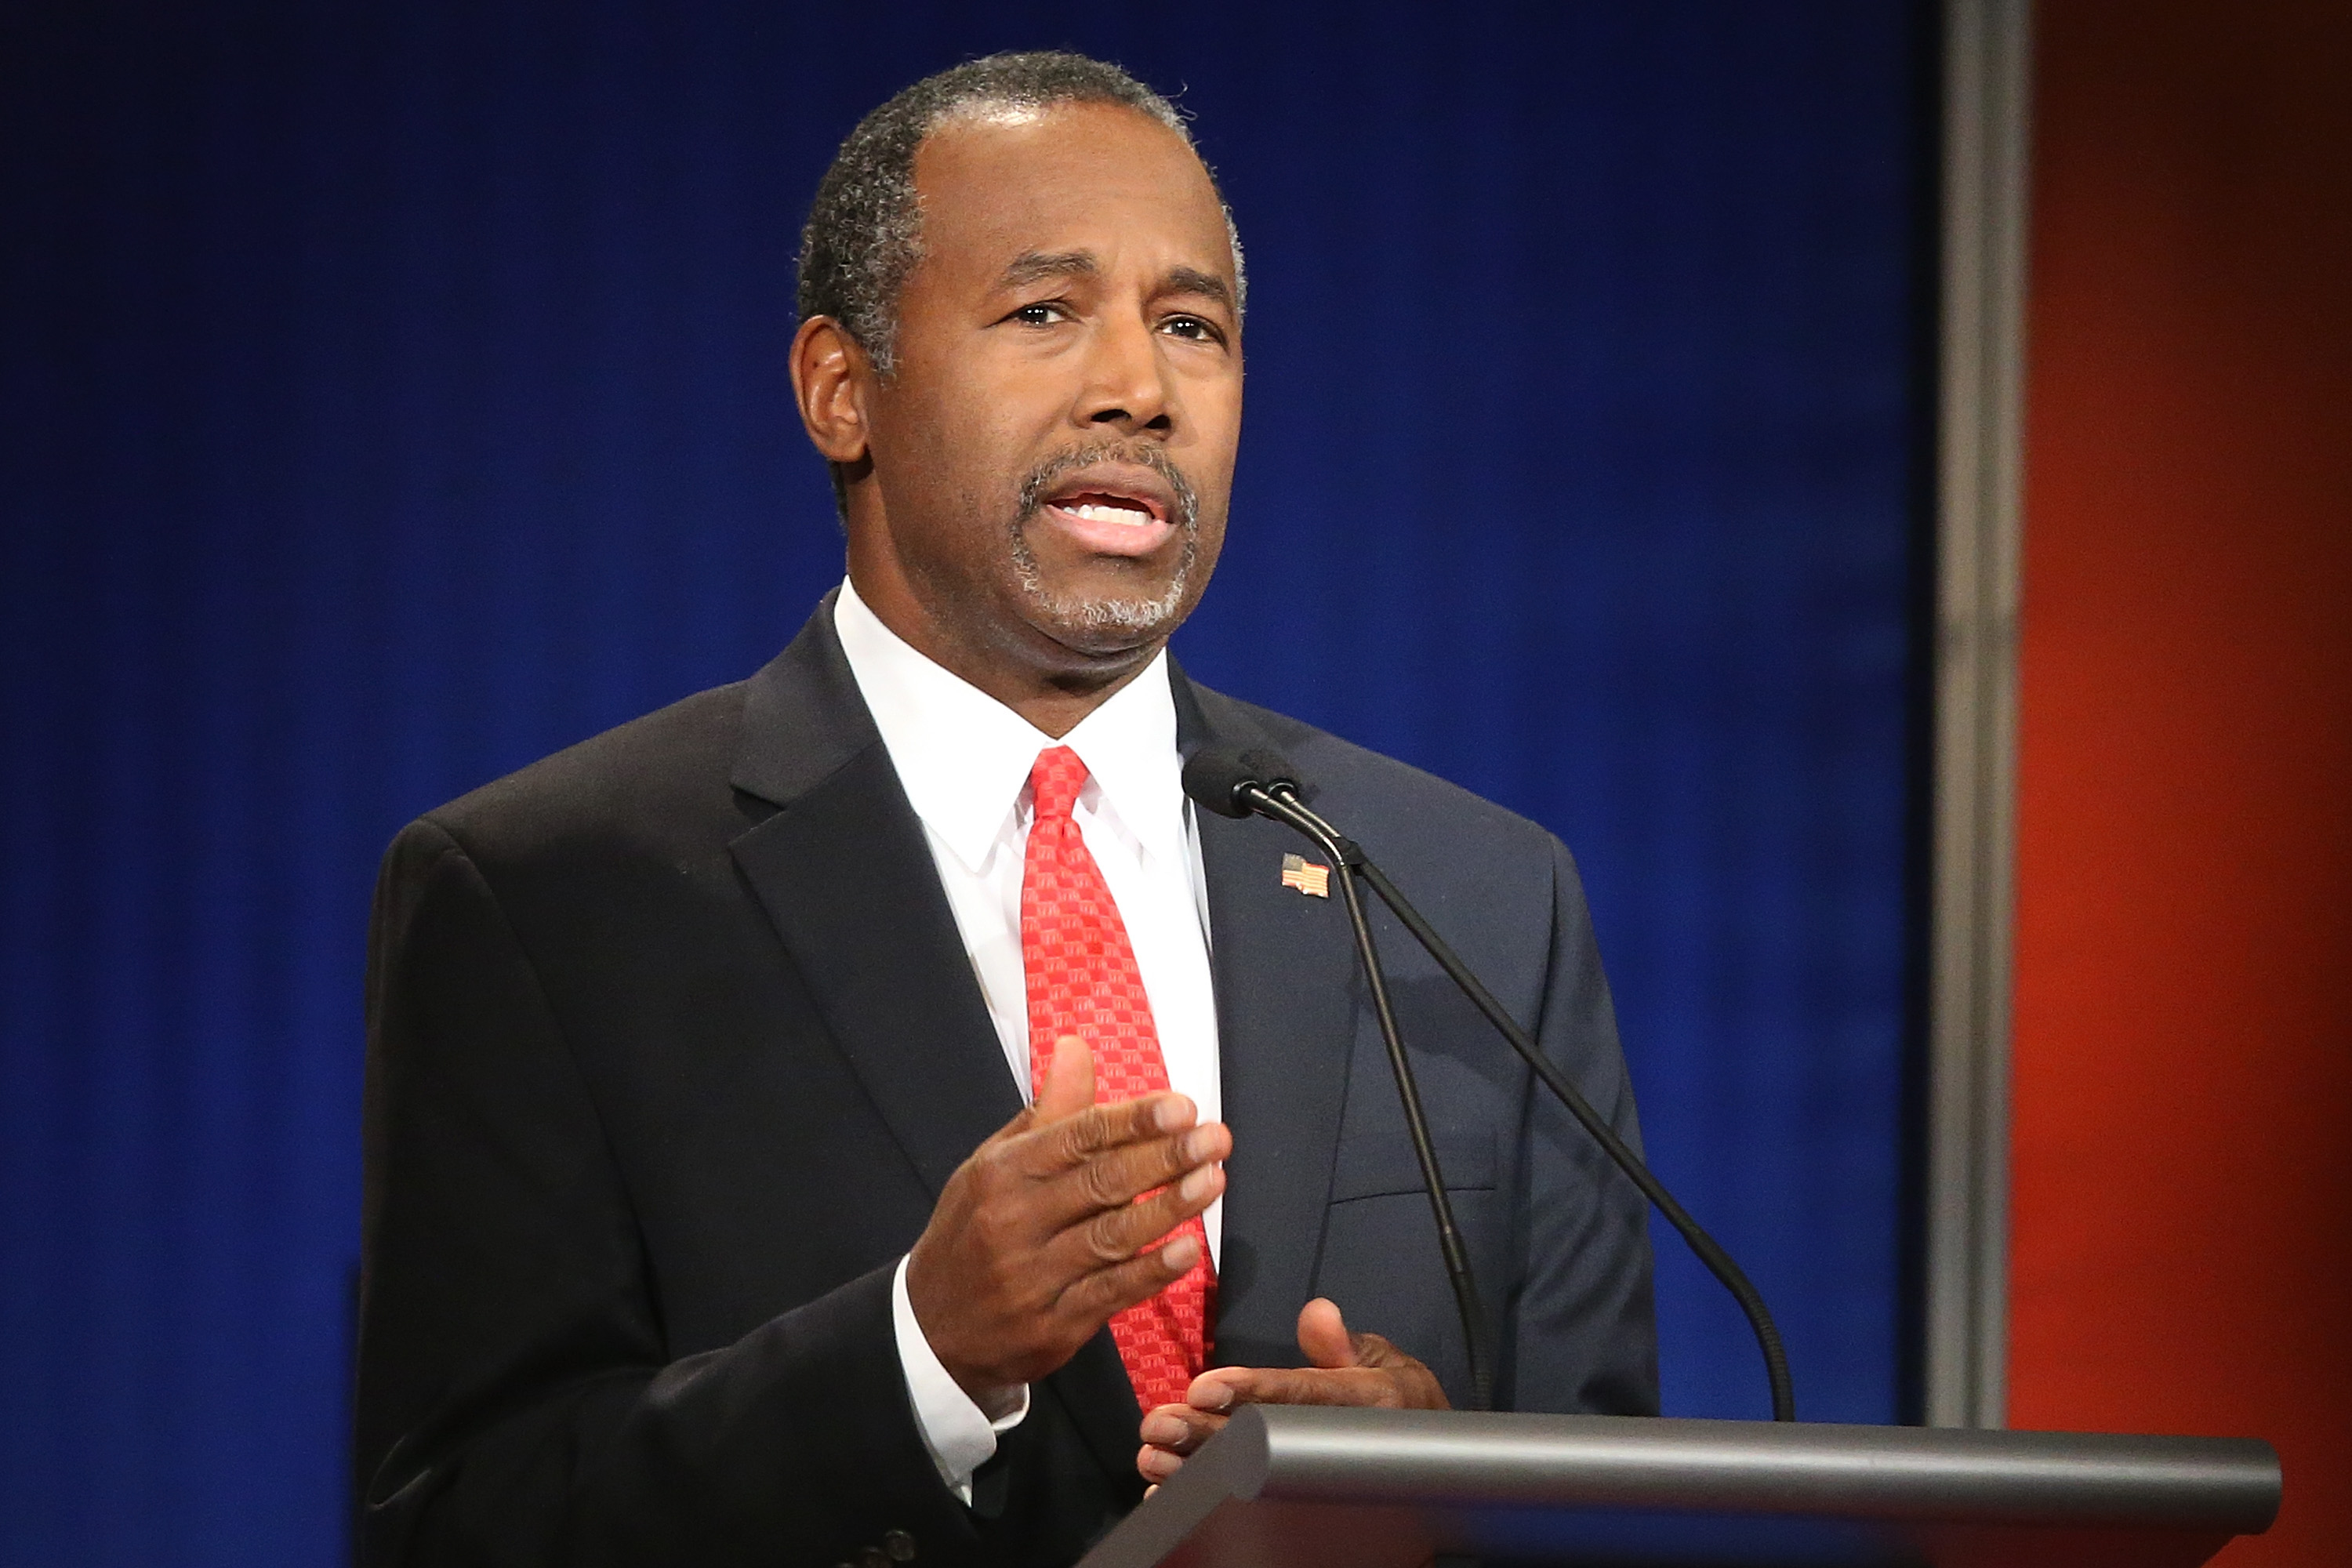 Ben Carson participates in the Fox Business Network Republican presidential debate at the North Charleston Coliseum and Performing Arts Center on Jan. 14, 2016 in North Charleston, S.C. (Scott Olson—Getty Images)